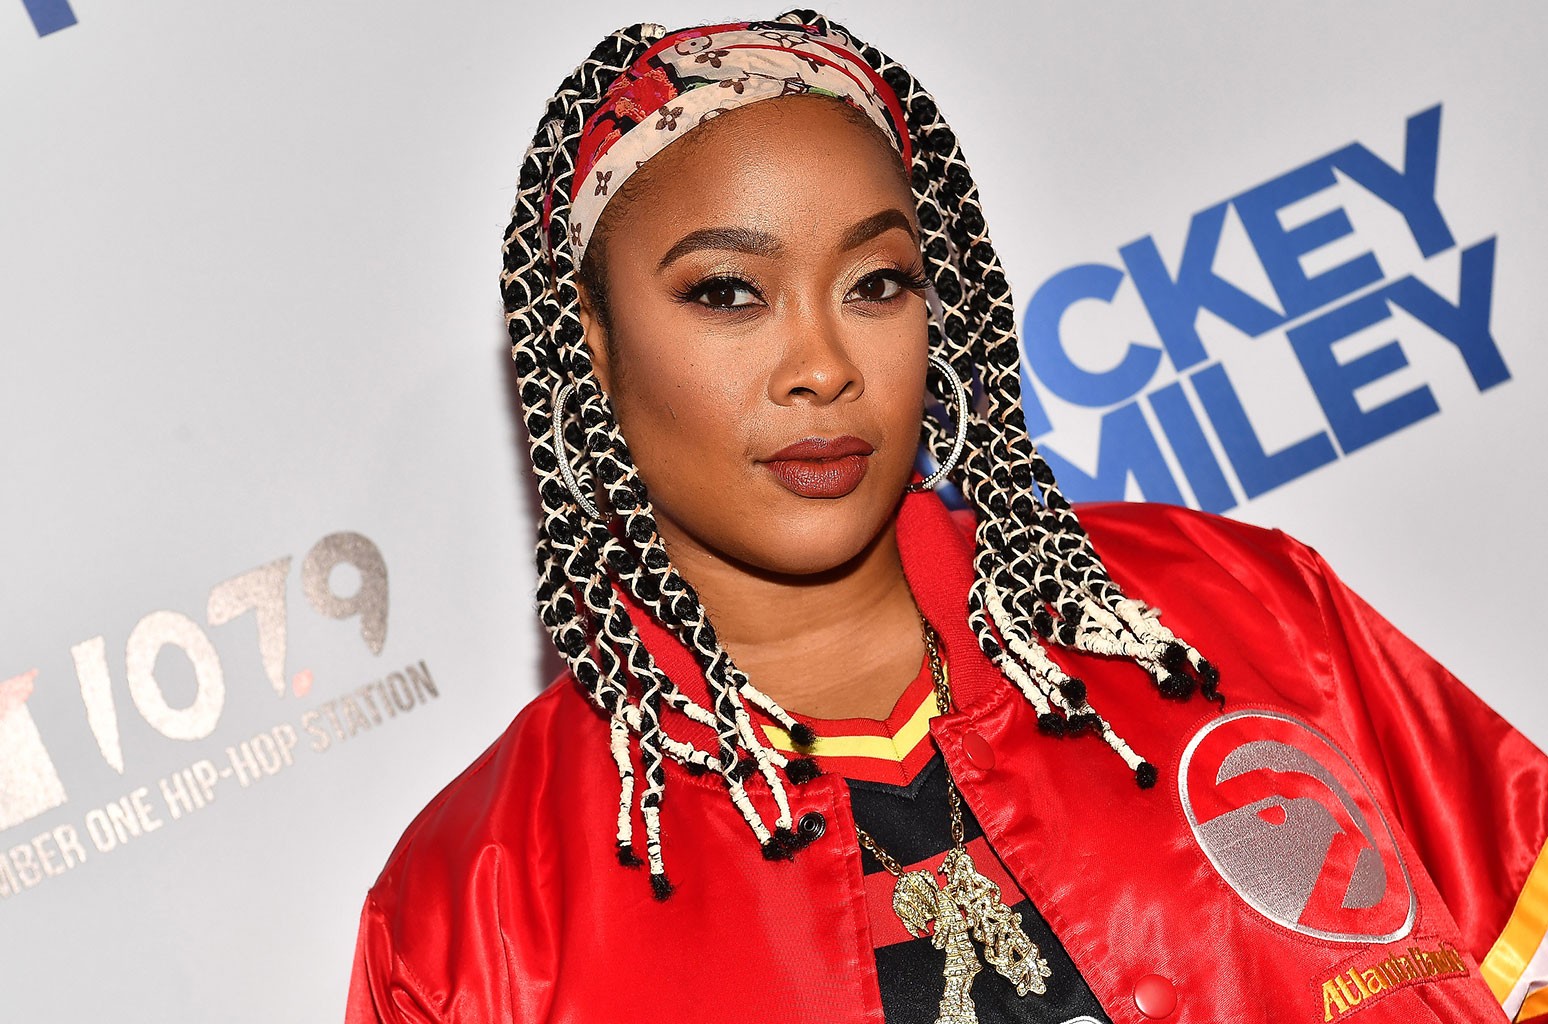 Da Brat Expecting First Child at 48: ‘I Thought It Wasn’t in the Cards for Me’